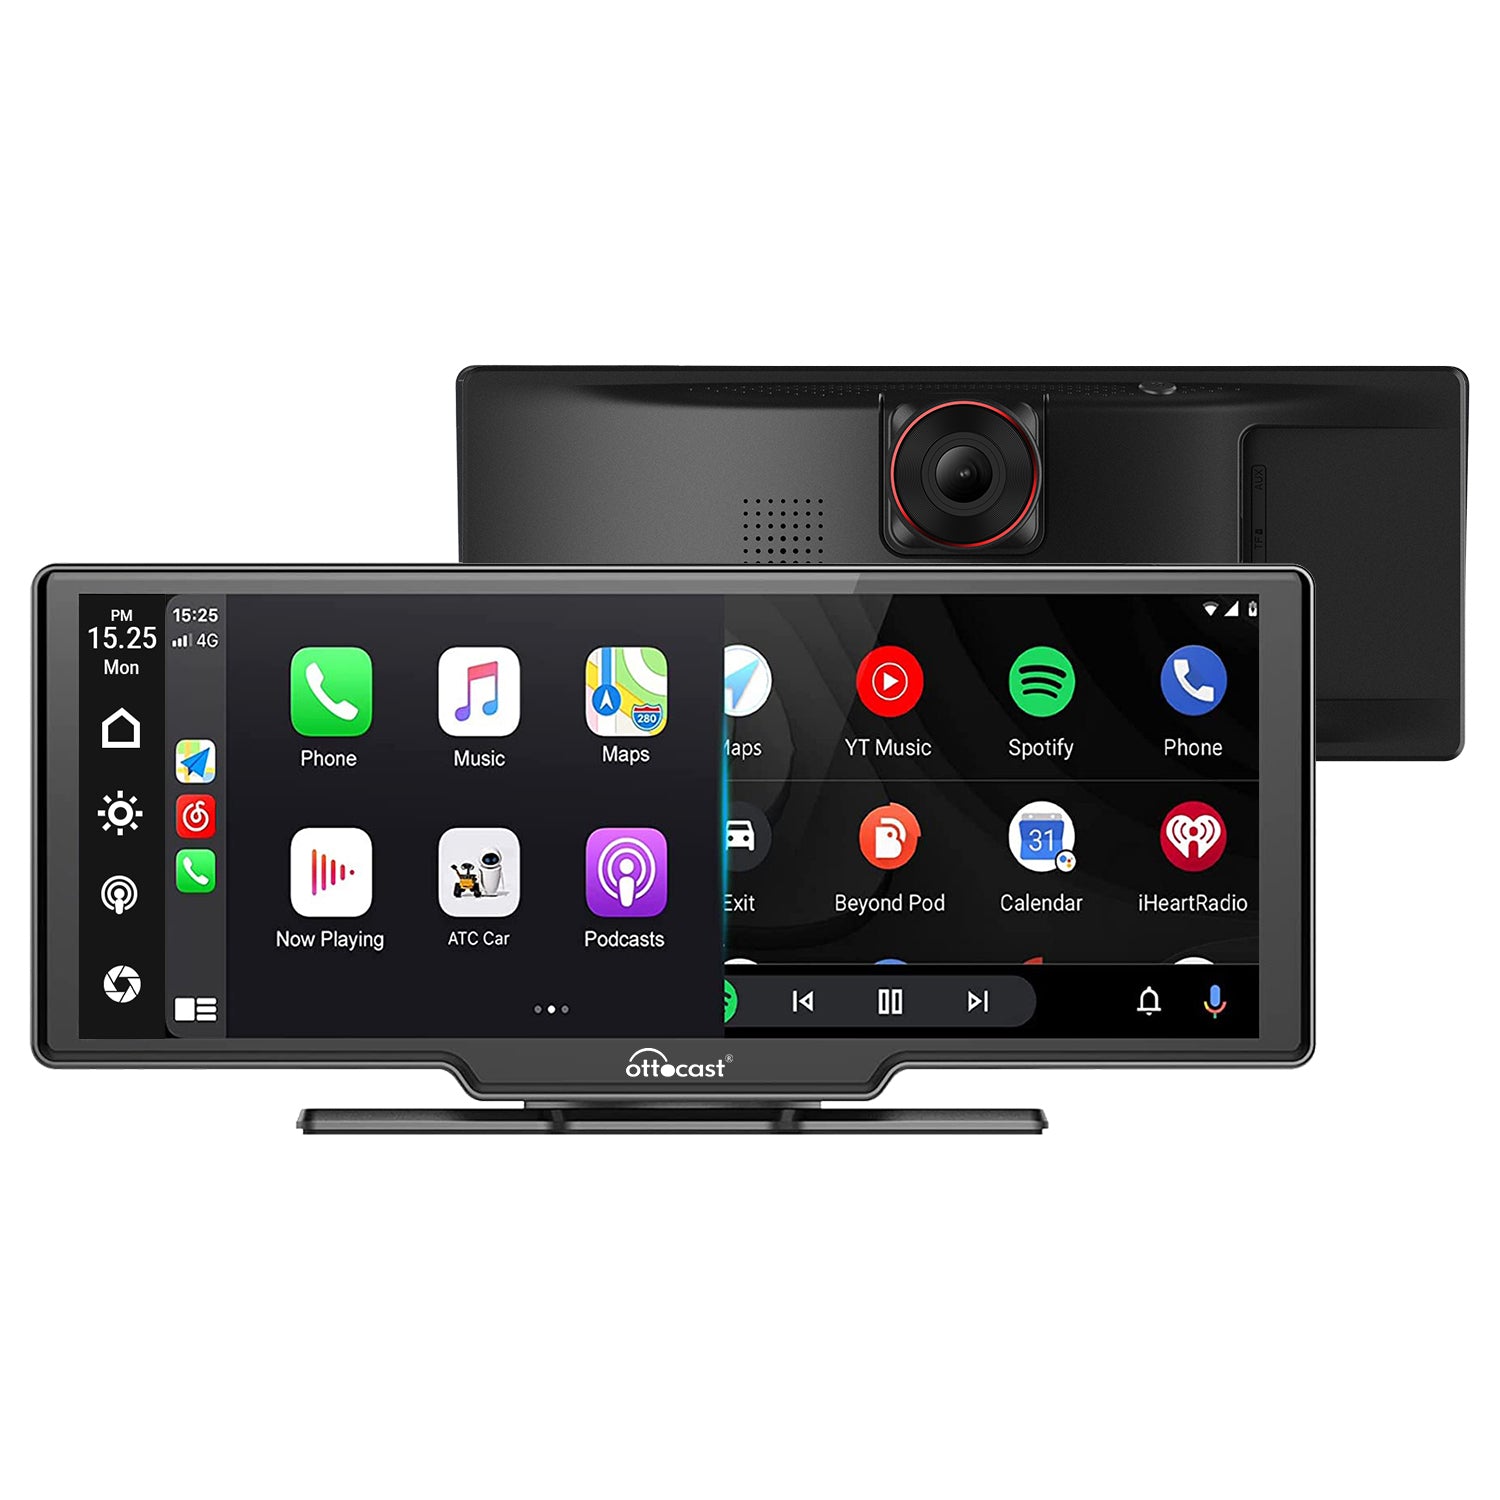 TODAY SALE SAVE $100 )⏰Portable 710 Apple CarPlay & Android Auto C